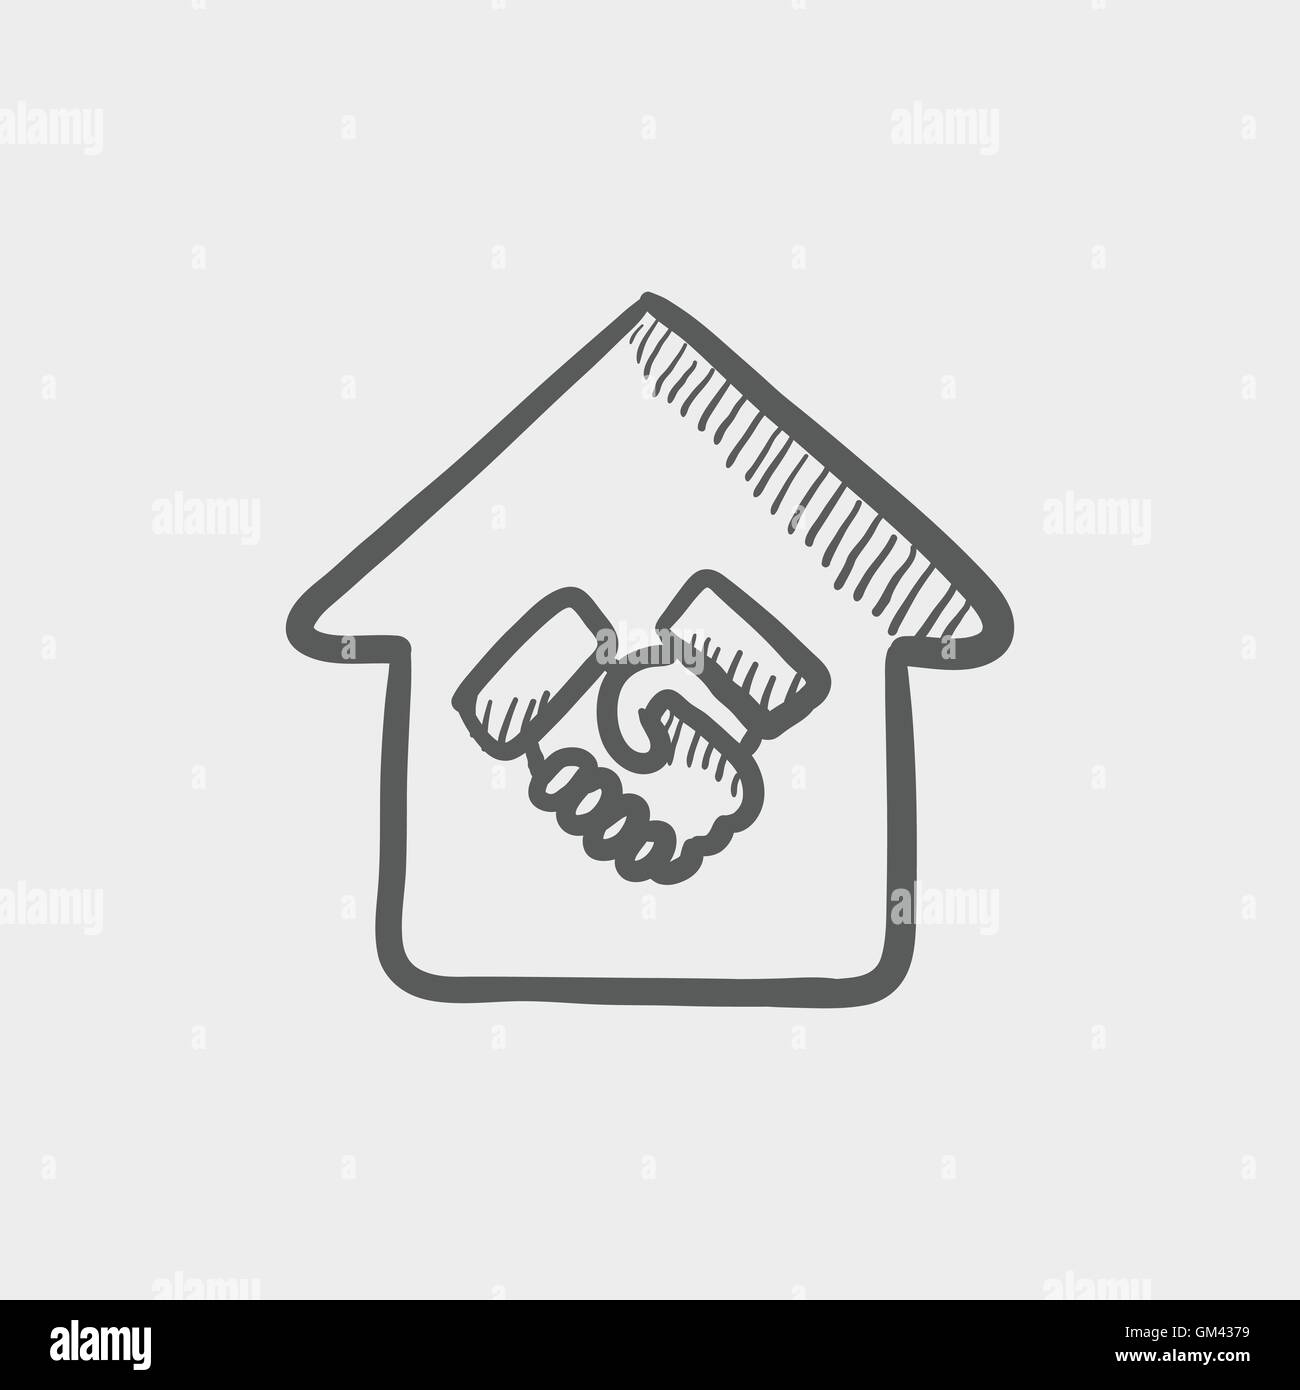 Successful housing transaction sketch icon Stock Vector